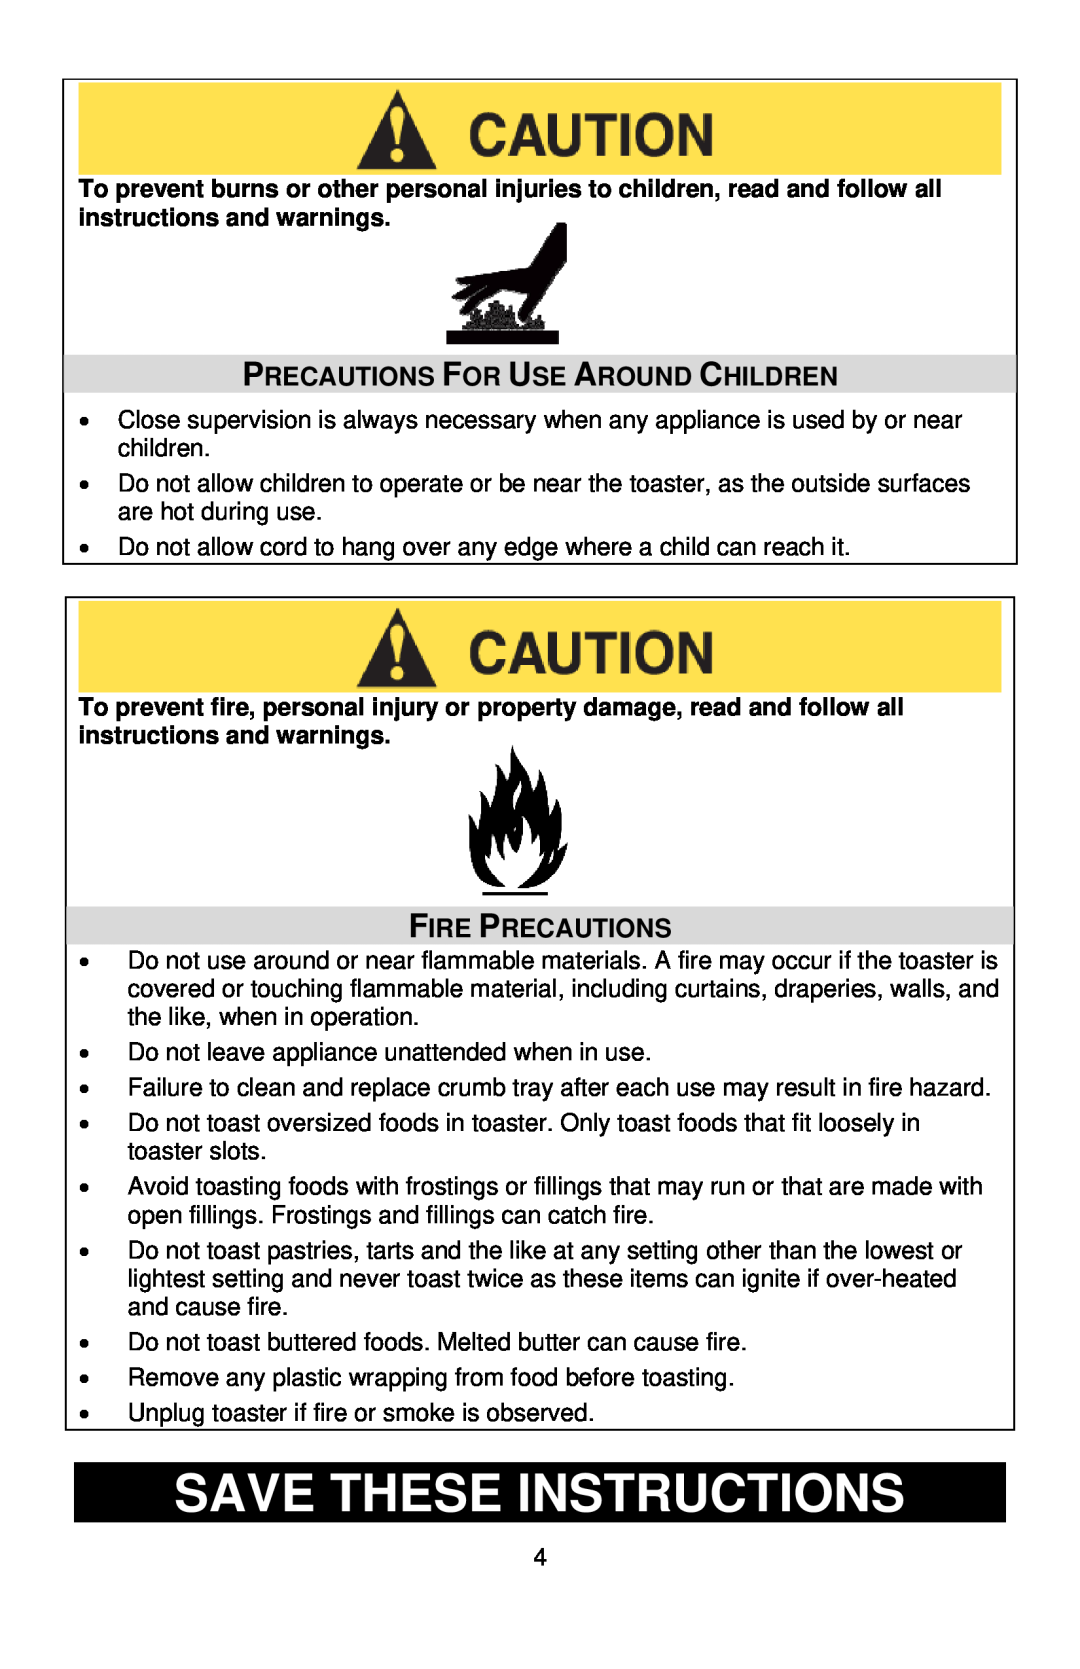 West Bend Infrared Toaster Save These Instructions, Precautions For Use Around Children, Fire Precautions 